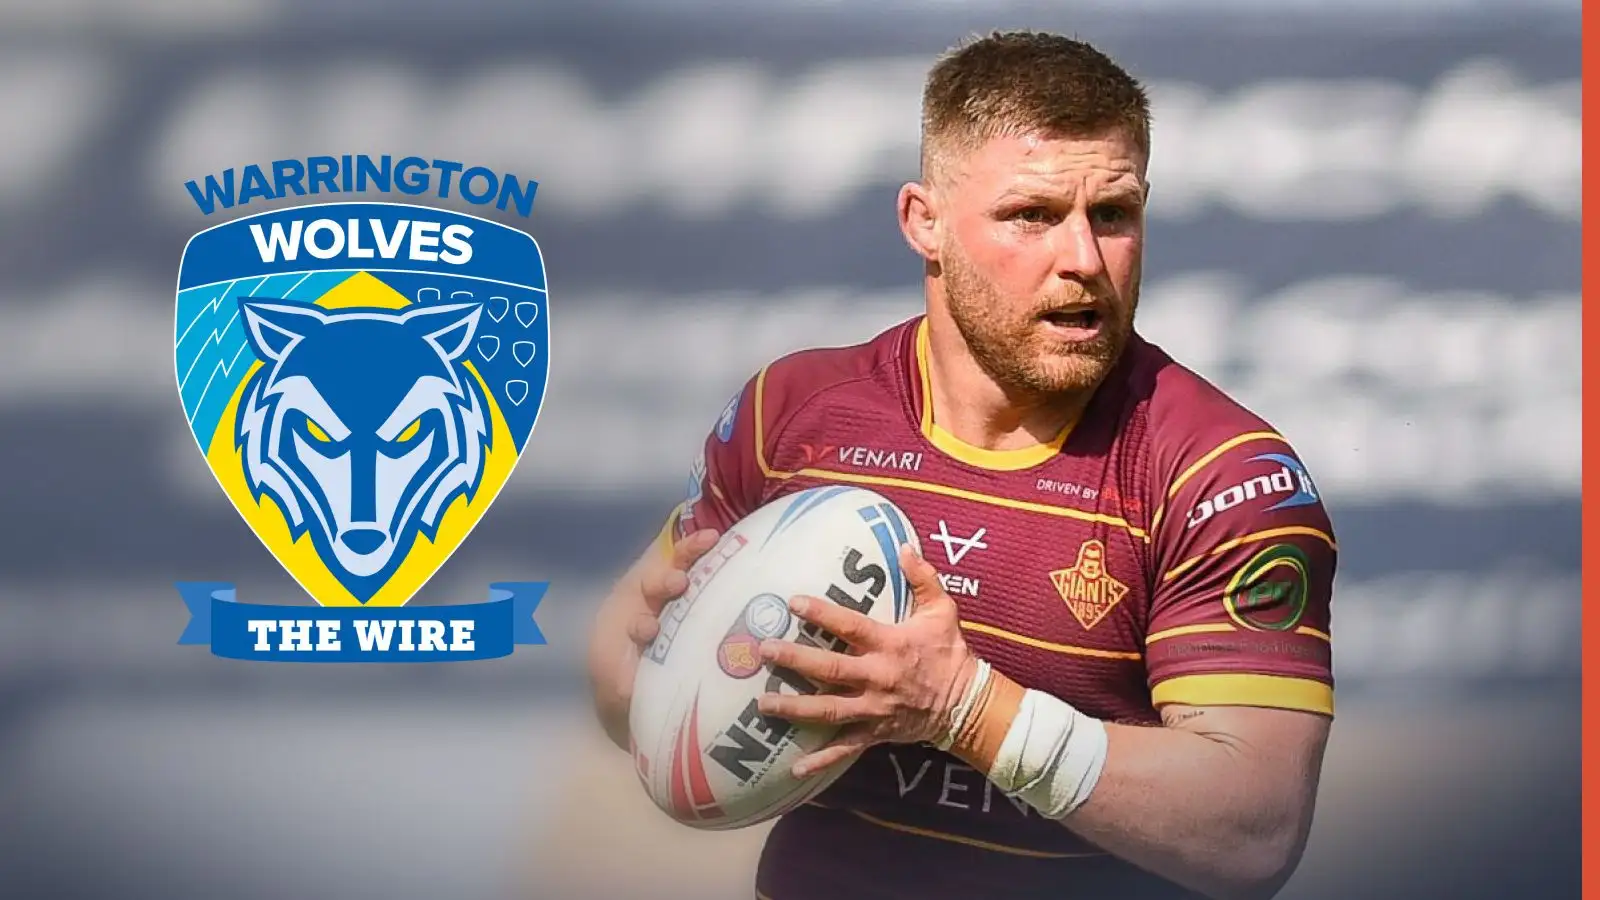 Warrington Wolves pay transfer fee to bring Huddersfield Giants forward to club early